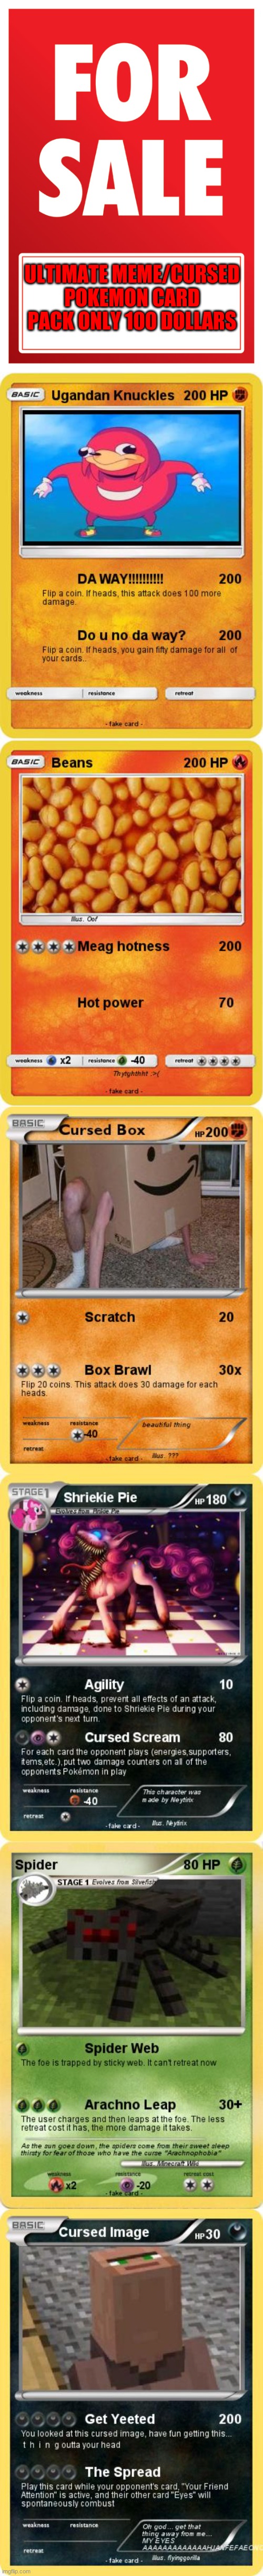 pokemon cards for sale | ULTIMATE MEME/CURSED POKEMON CARD PACK ONLY 100 DOLLARS | image tagged in for sale,pokemon,cursed,meme,funny,yes | made w/ Imgflip meme maker